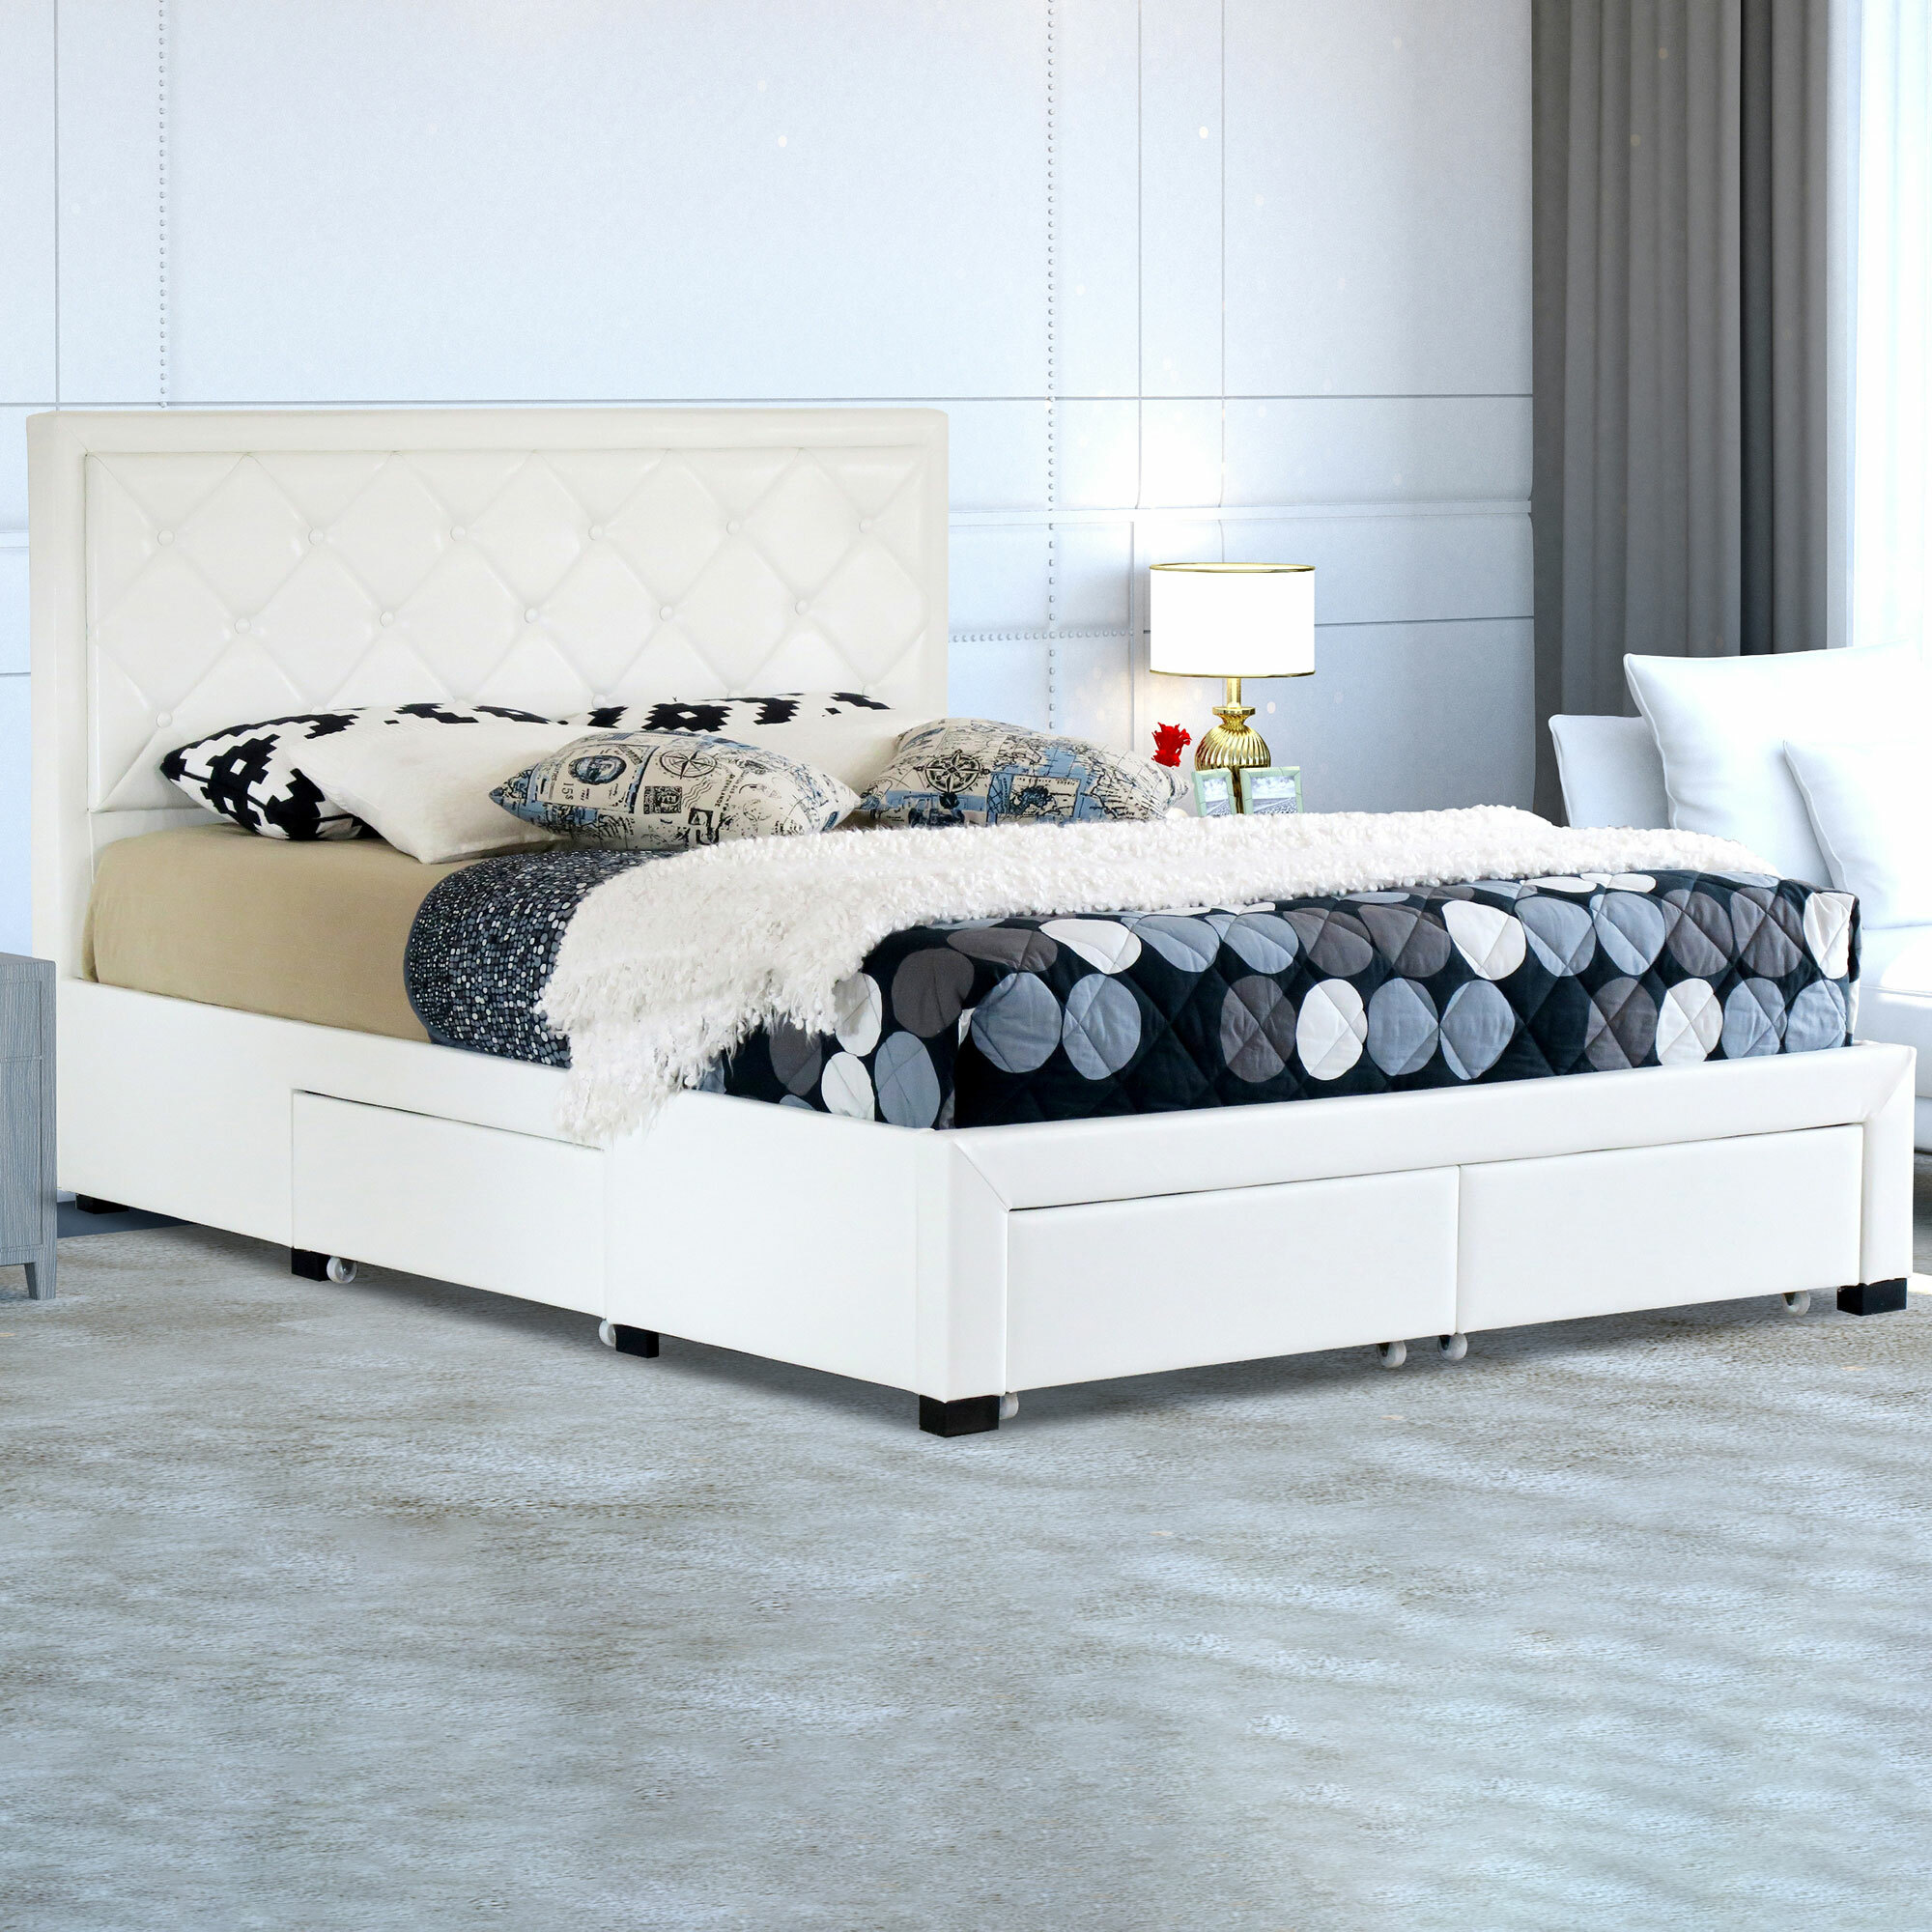 Faux Leather Bed Frame With Storage, White Leather Single Bed Frame